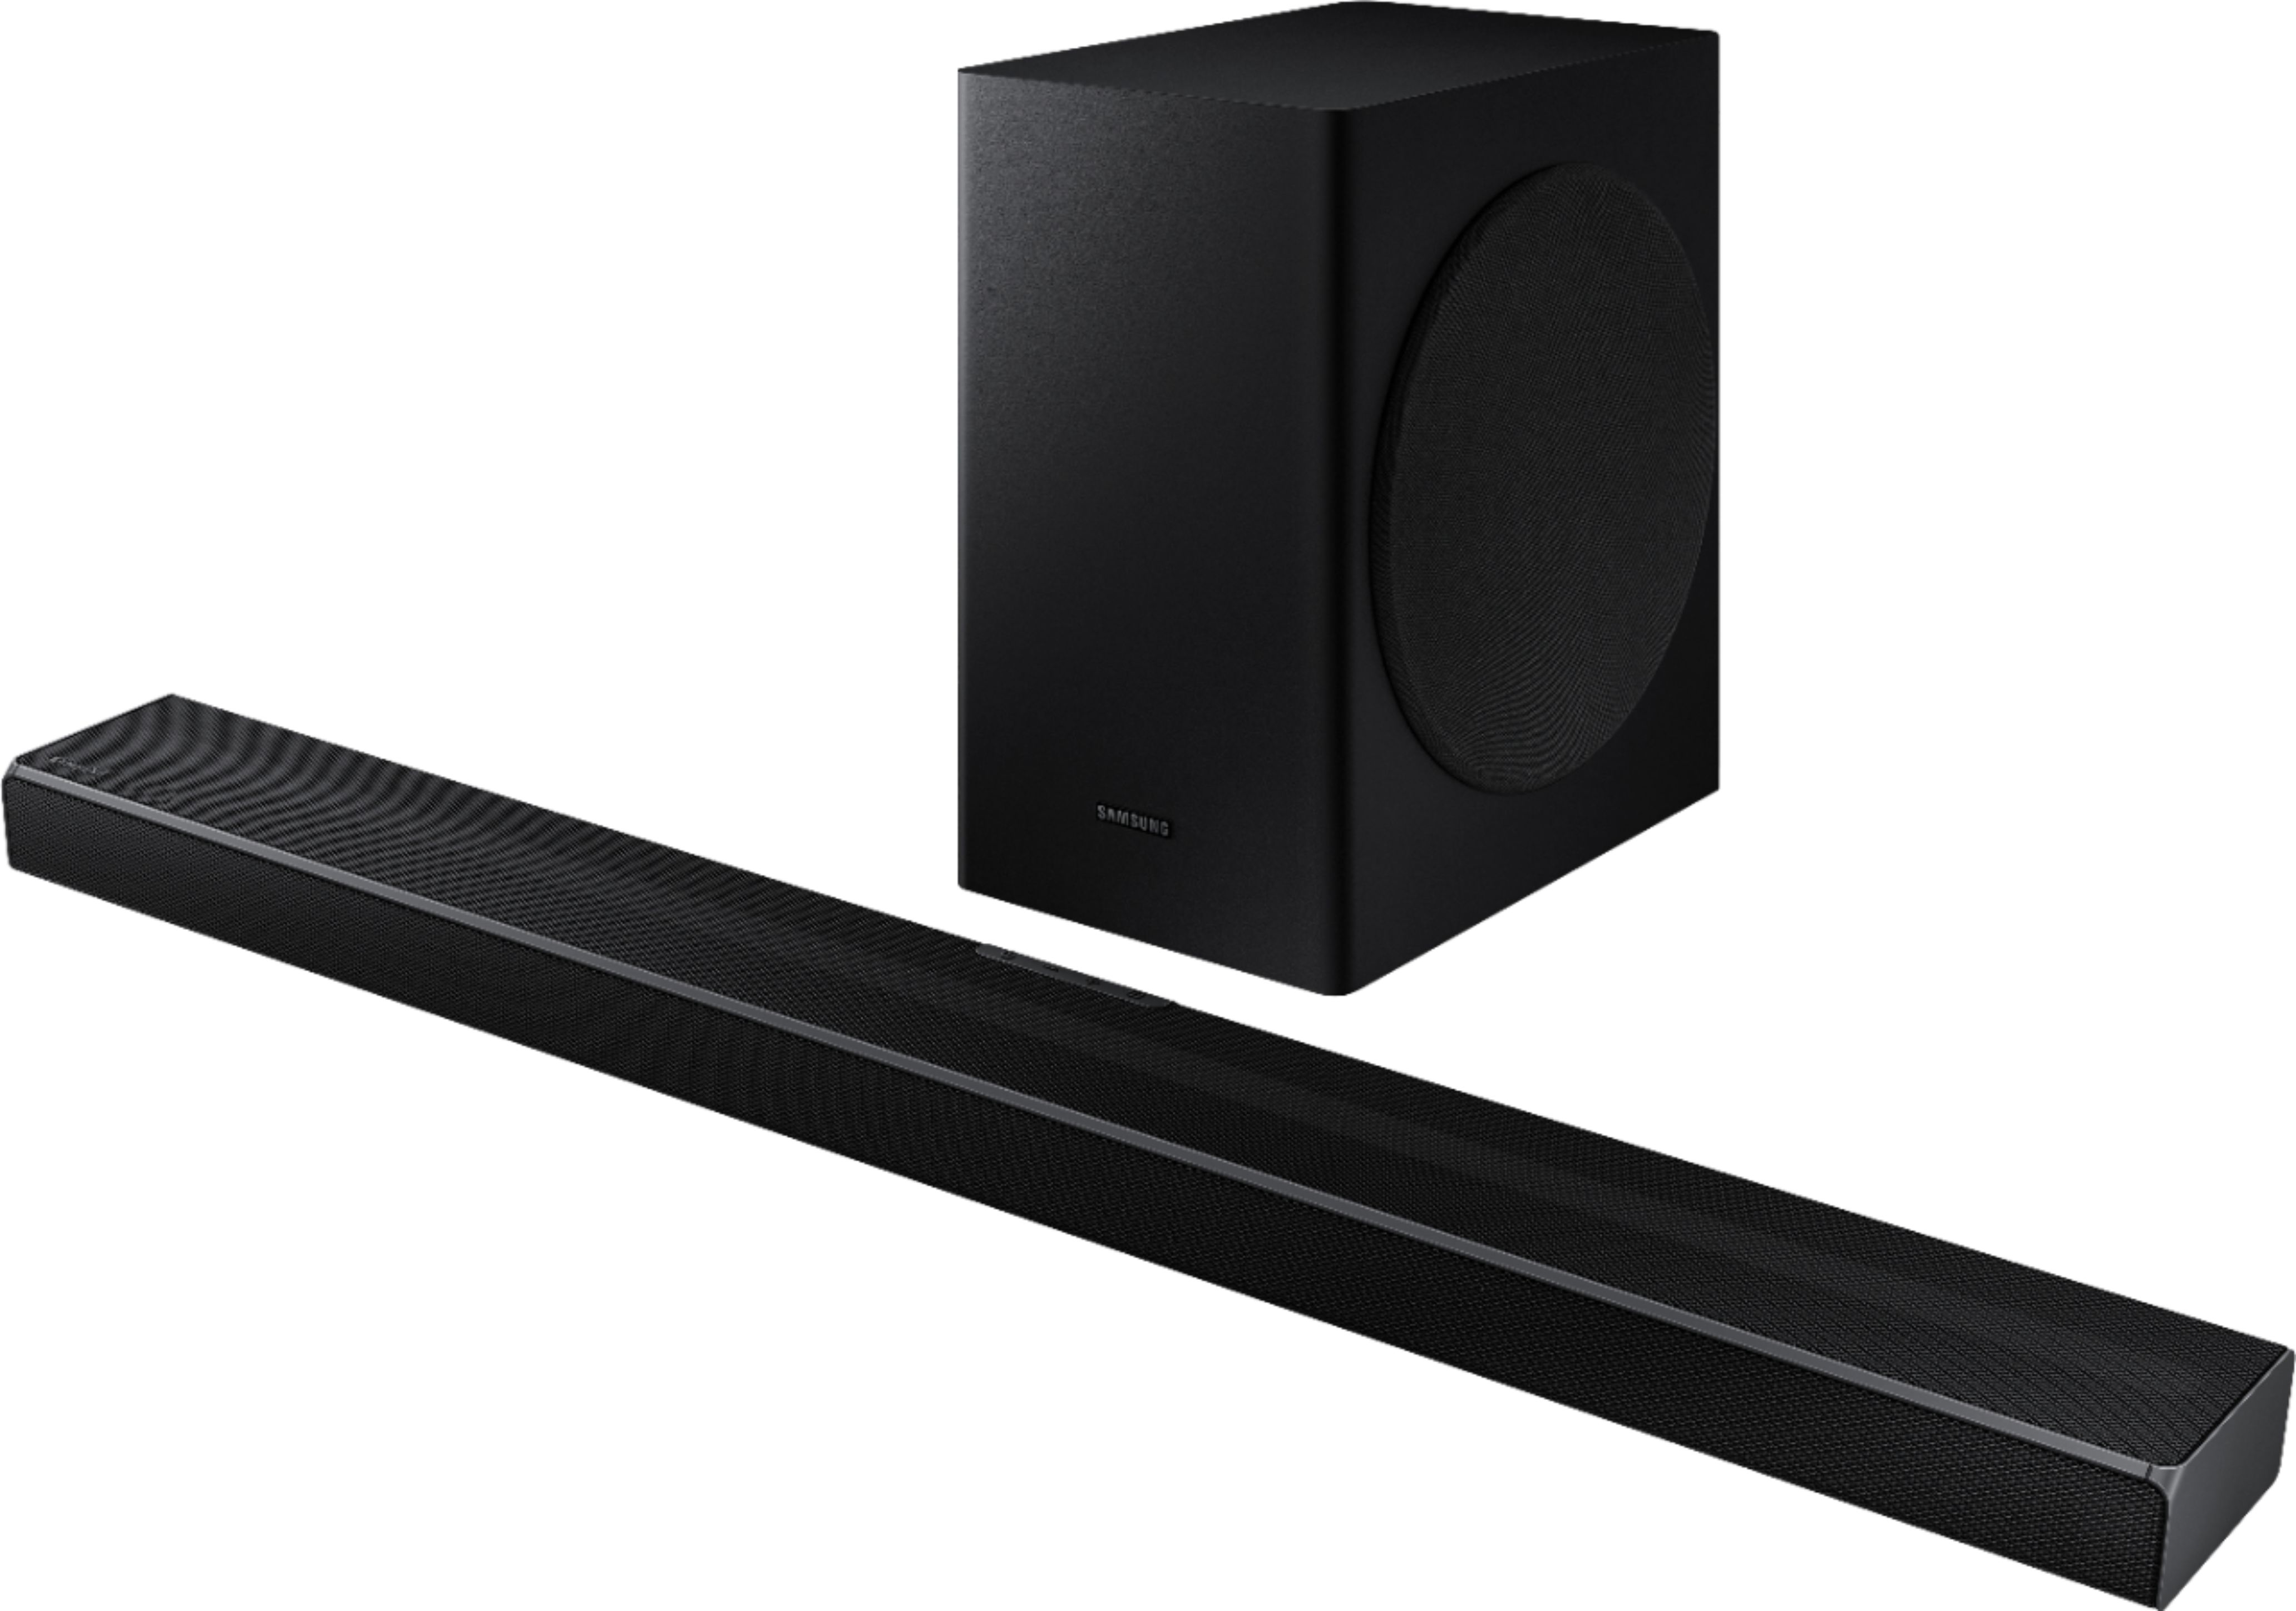 Angle View: Samsung - 5.1-Channel Soundbar with Wireless Subwoofer and Acoustic Beam - Black